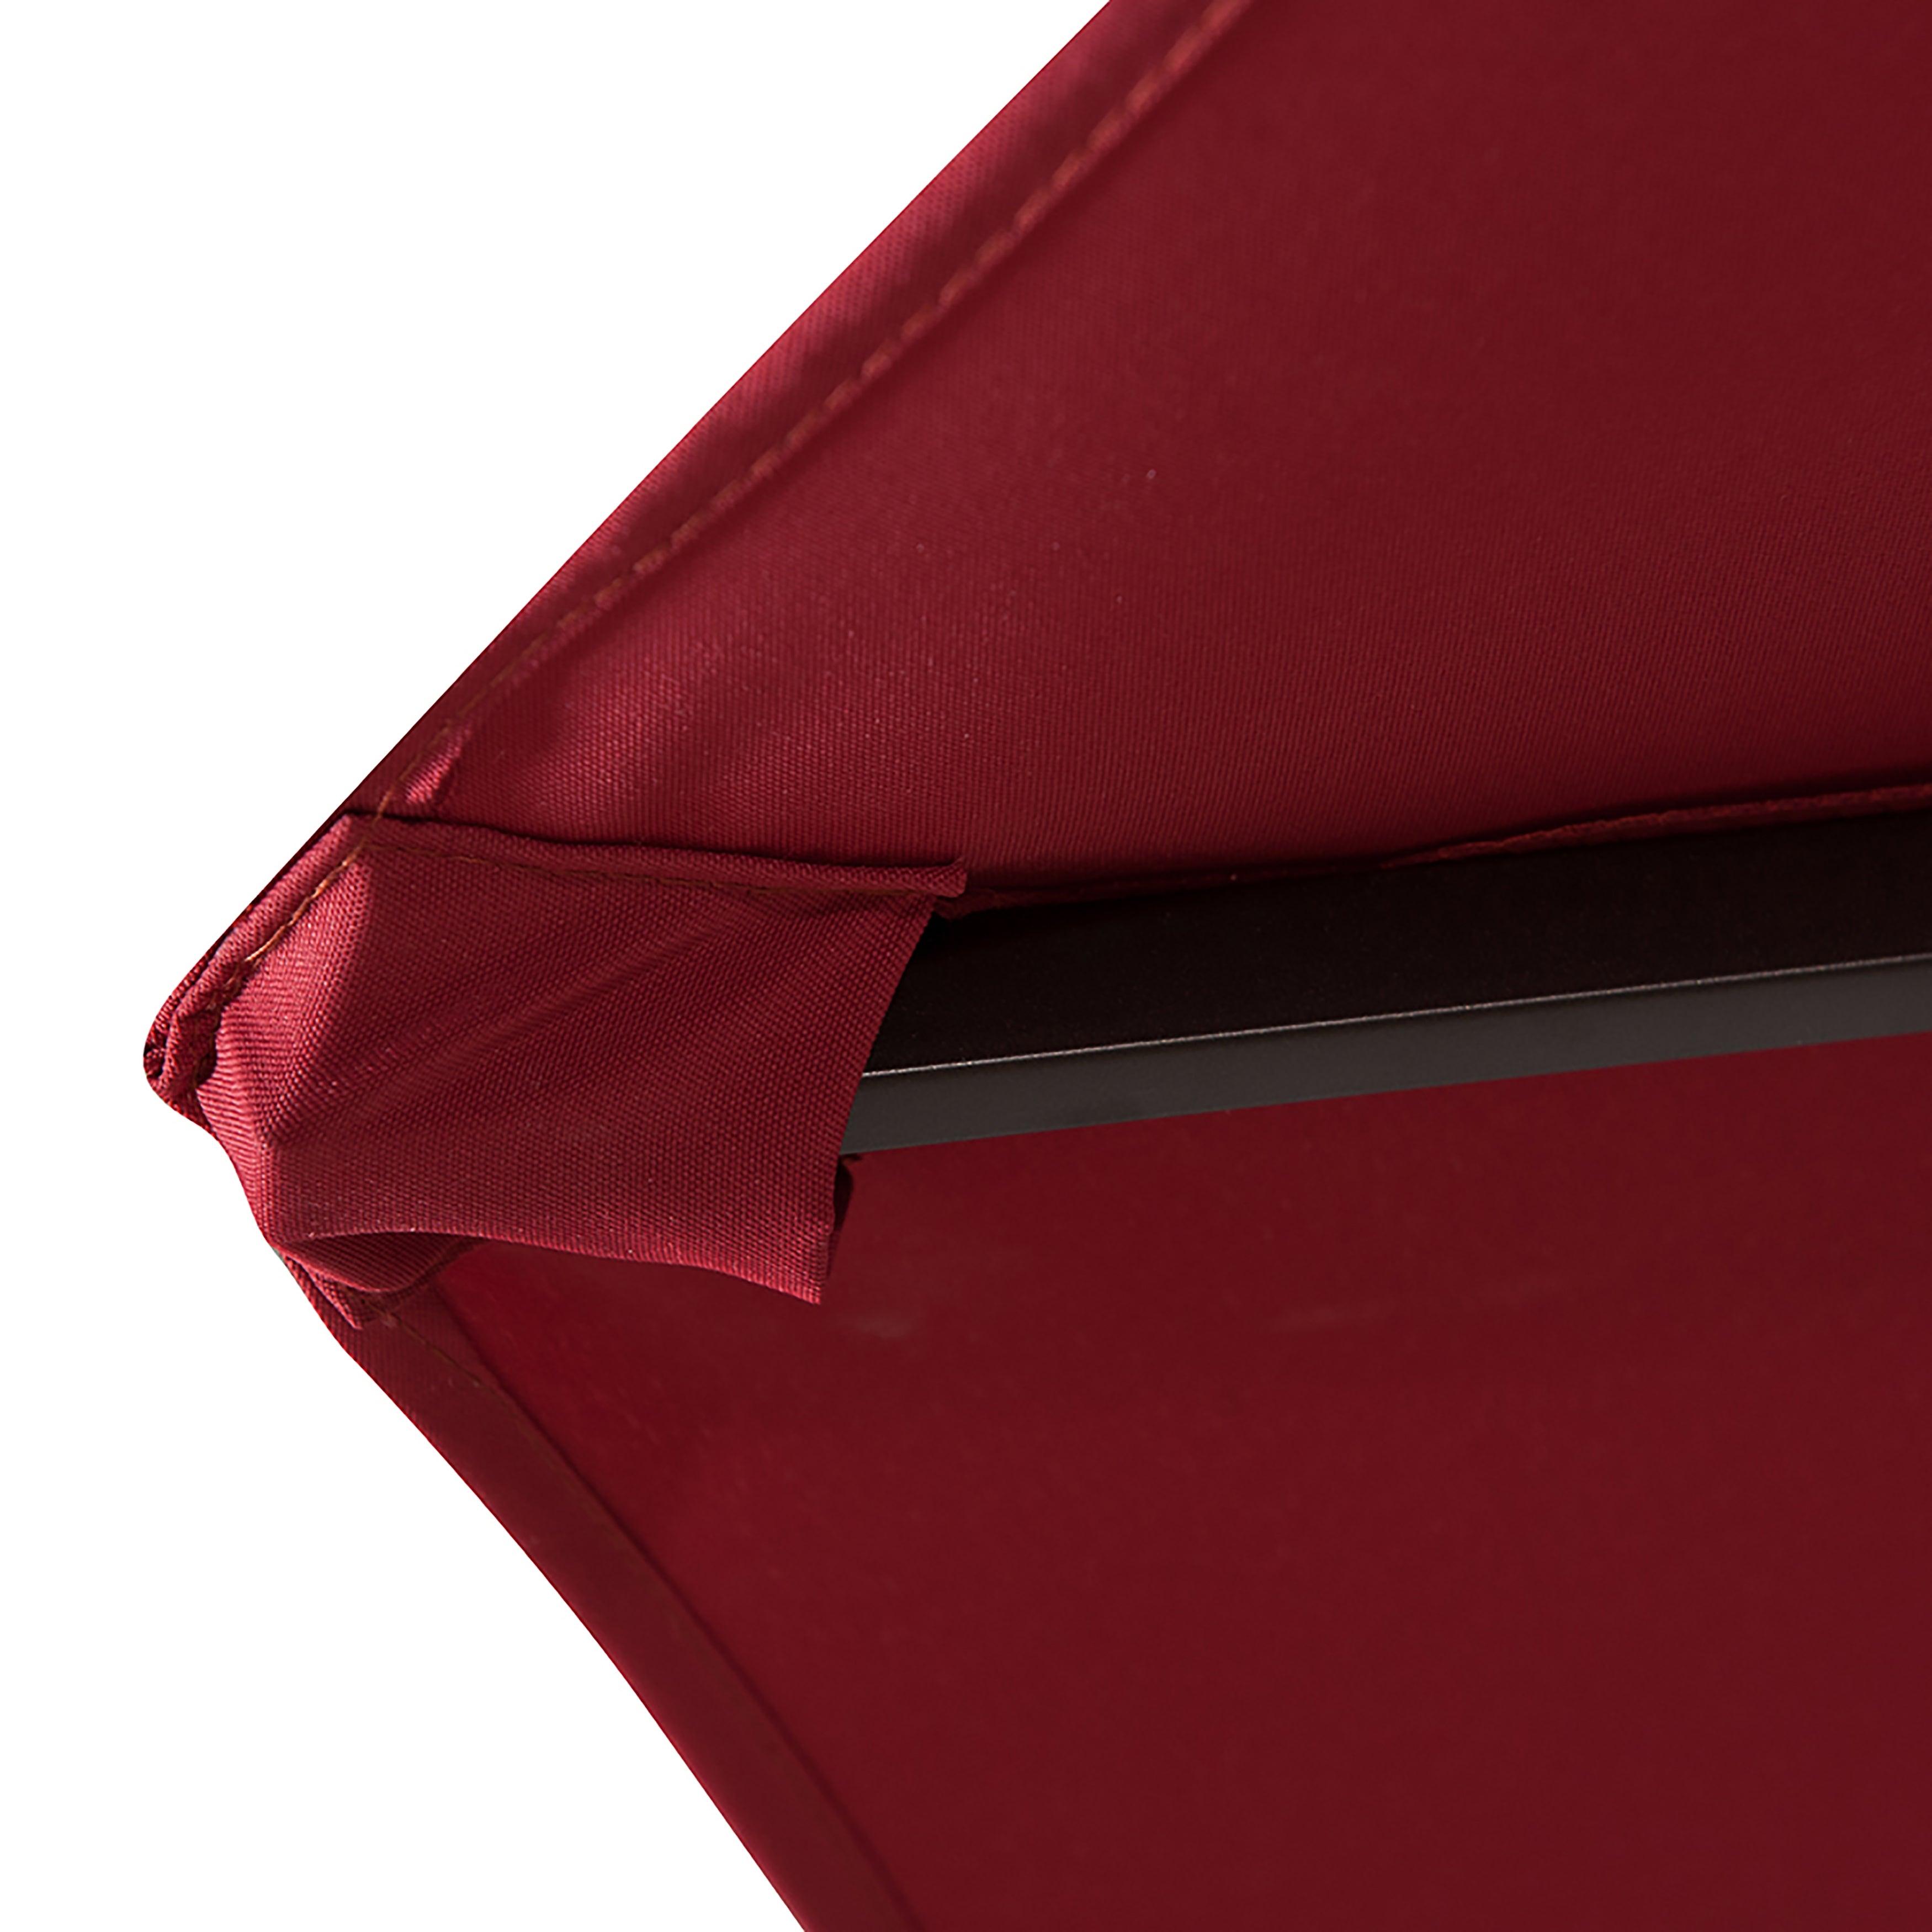 9 Ft Patio Umbrella for Outdoor Shade, Red